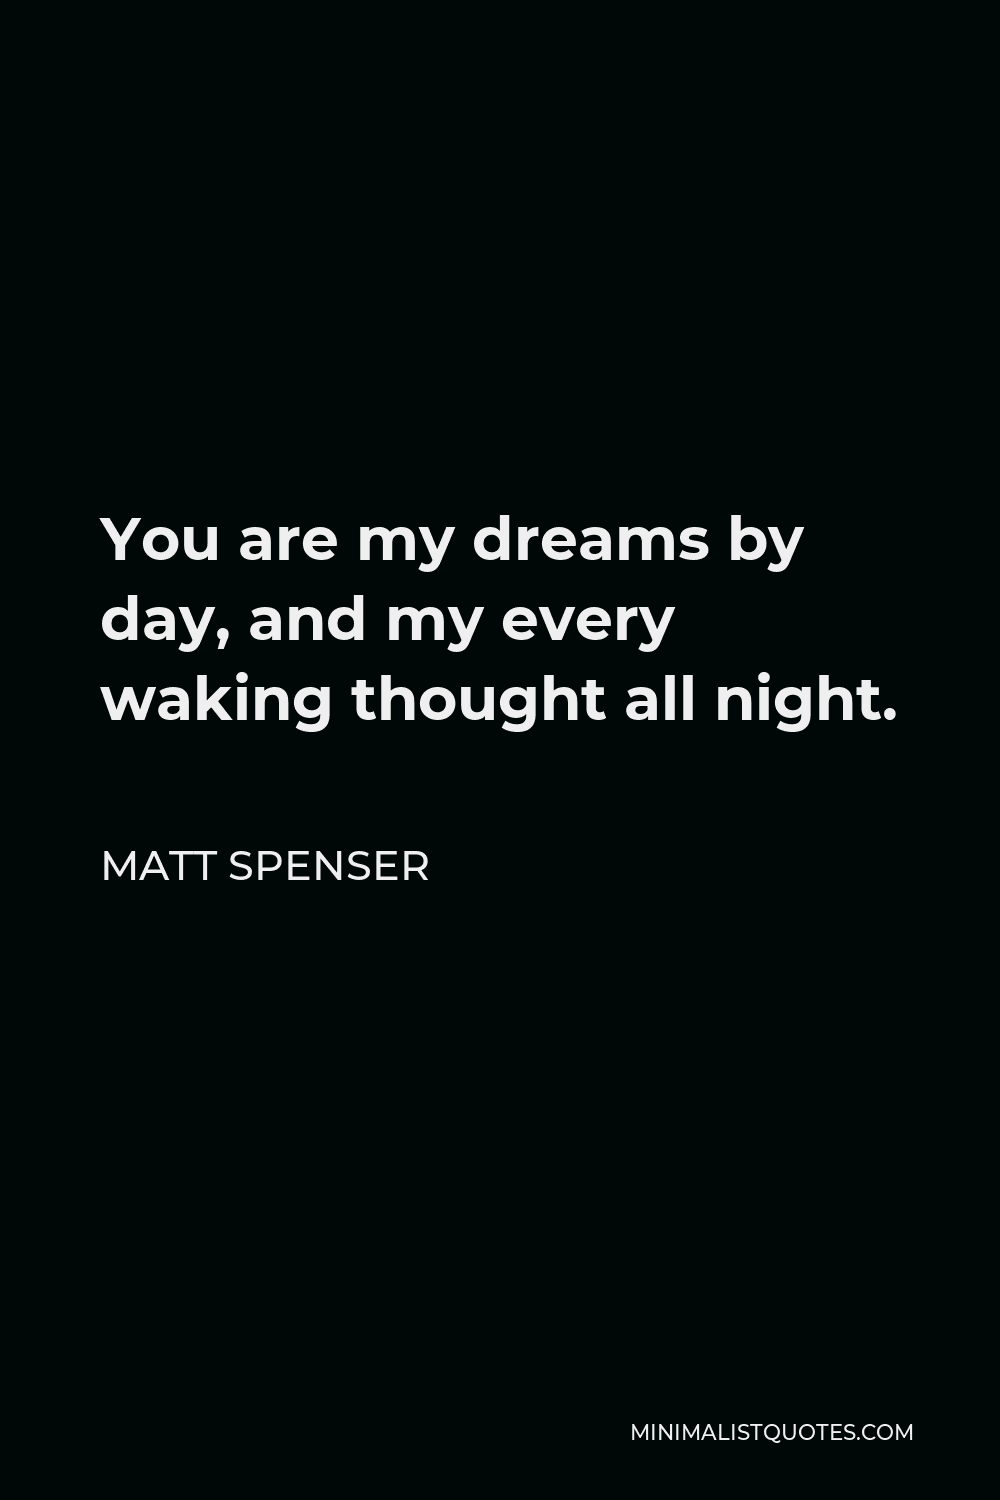 Matt Spenser Quote - You are my dreams by day, and my every waking thought all night.